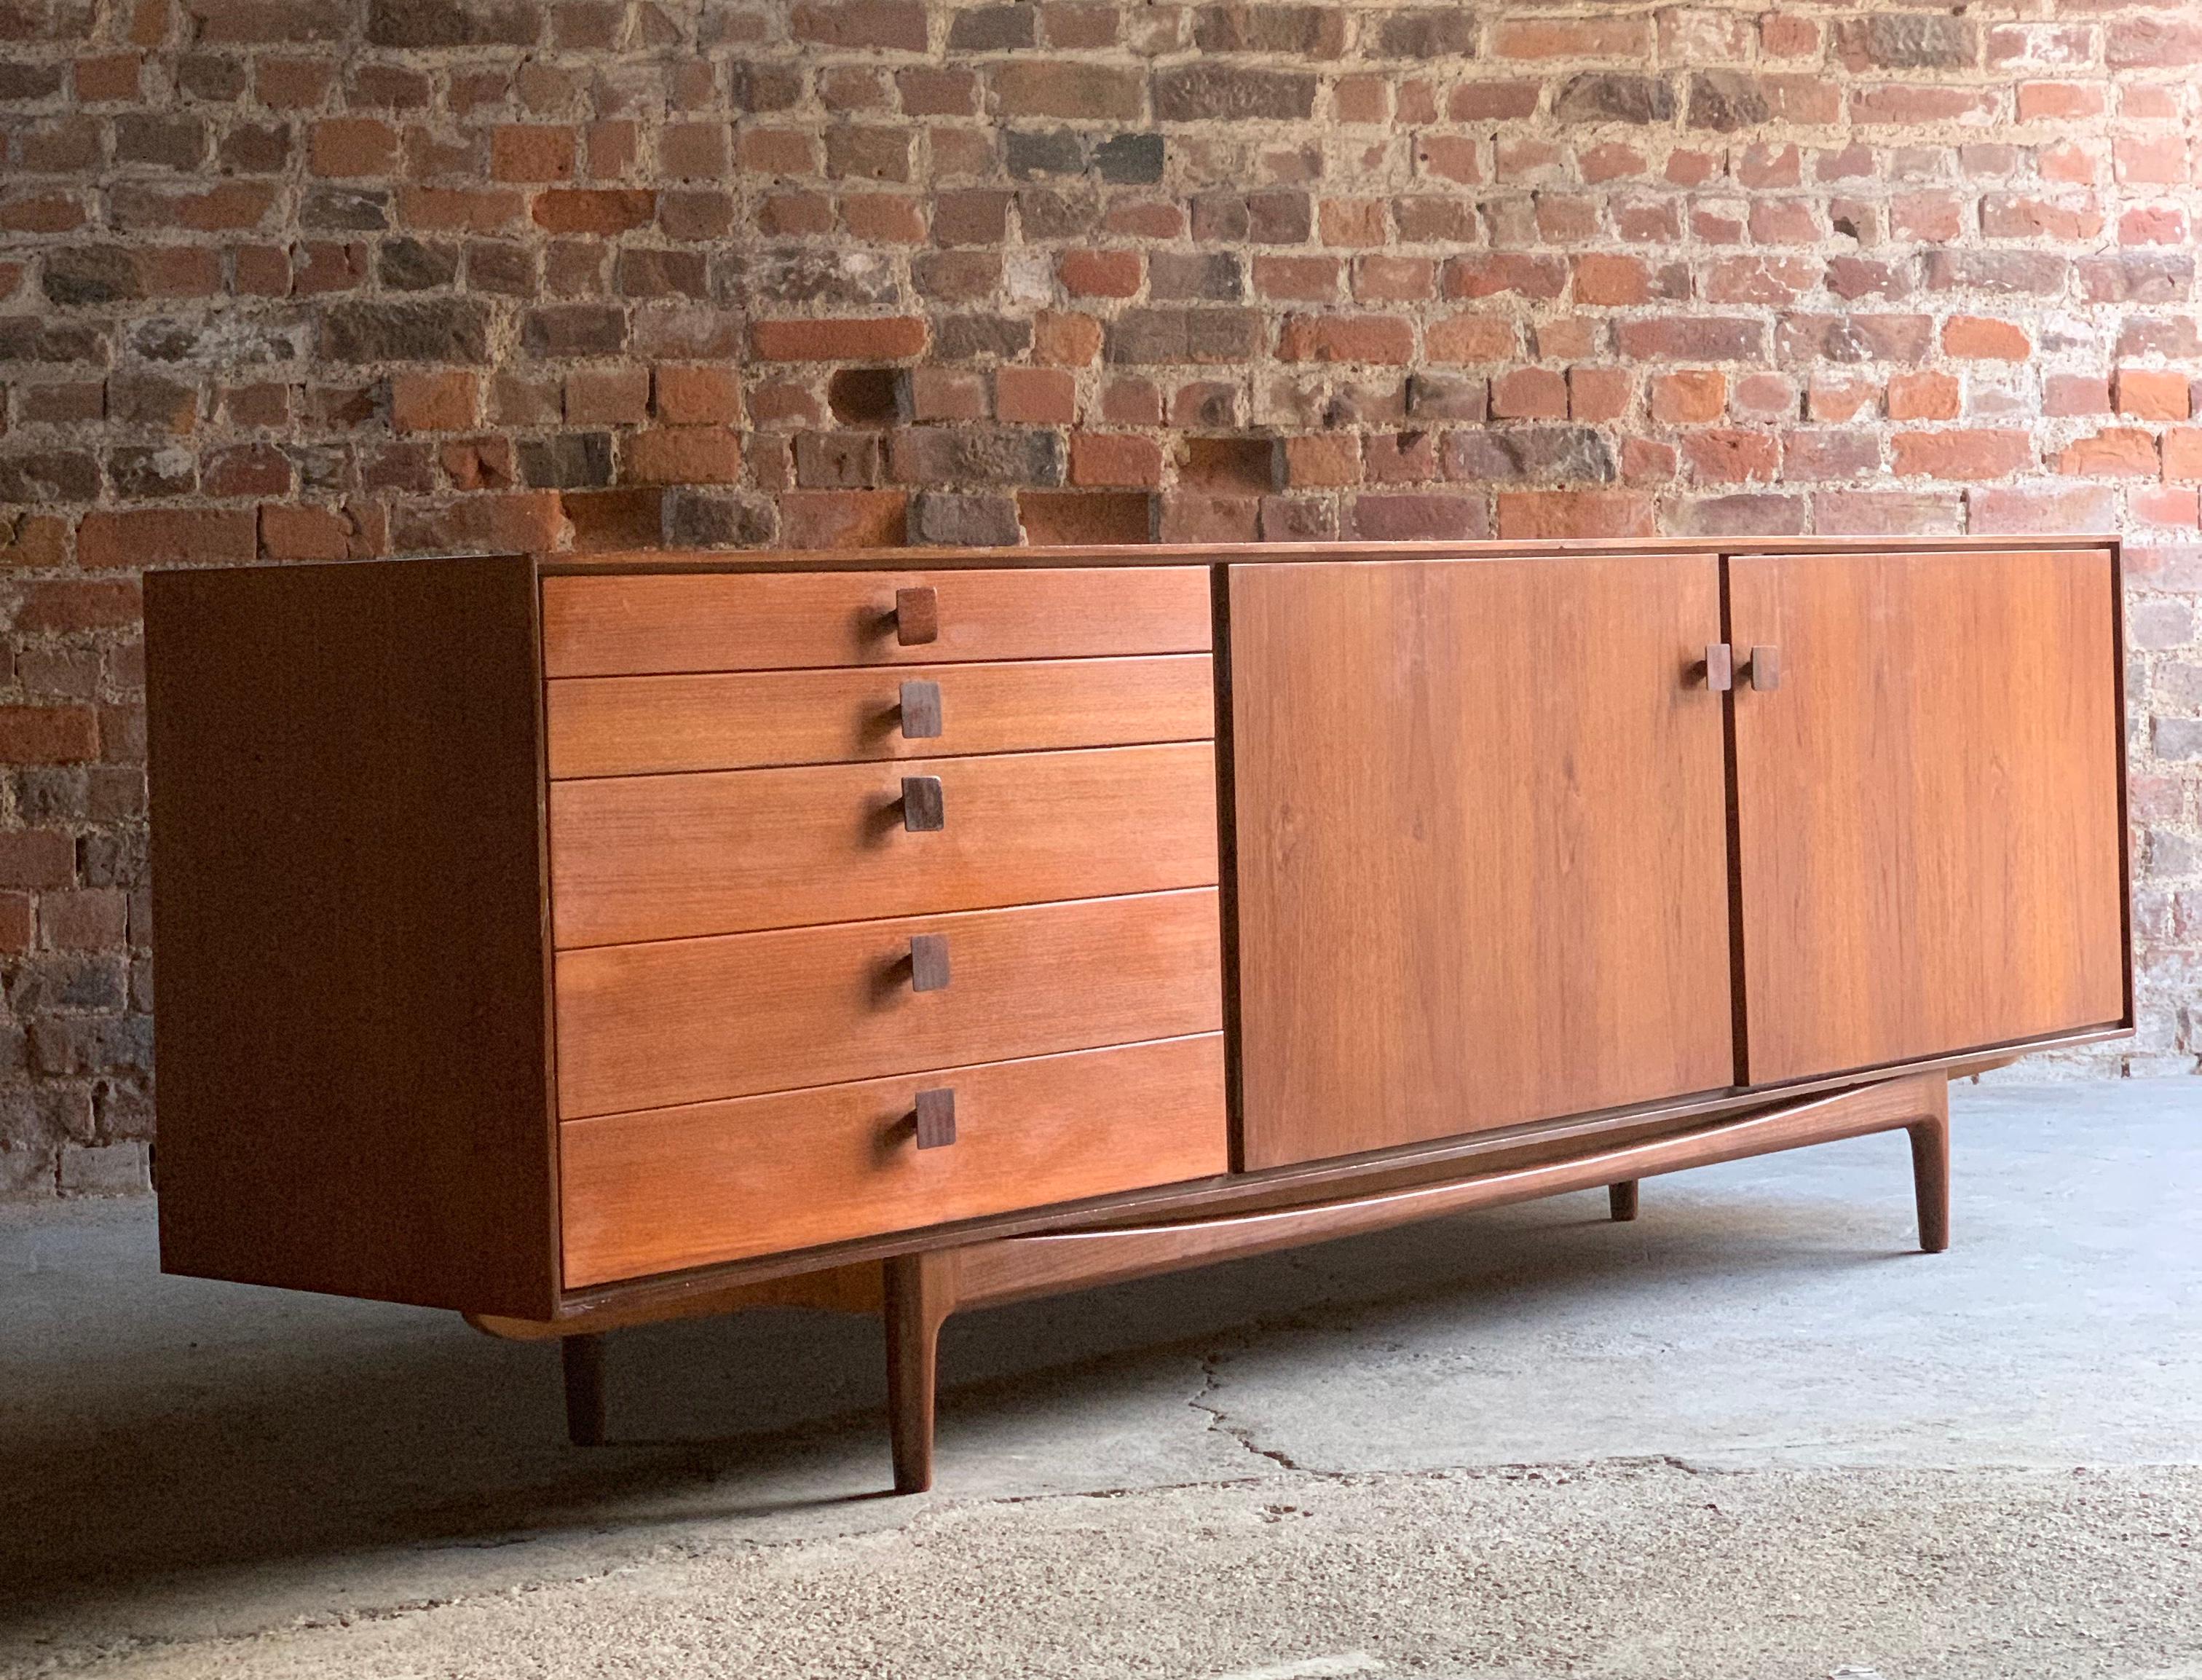 Ib Kofod-Larsen African teak sideboard manufactured in the UK for G-Plan in the 1960s

Magnificent midcentury Danish design sideboard credenza designed by Ib Kofod-Larsen, and manufactured by G-Plan, circa 1960s, produced from African teak and